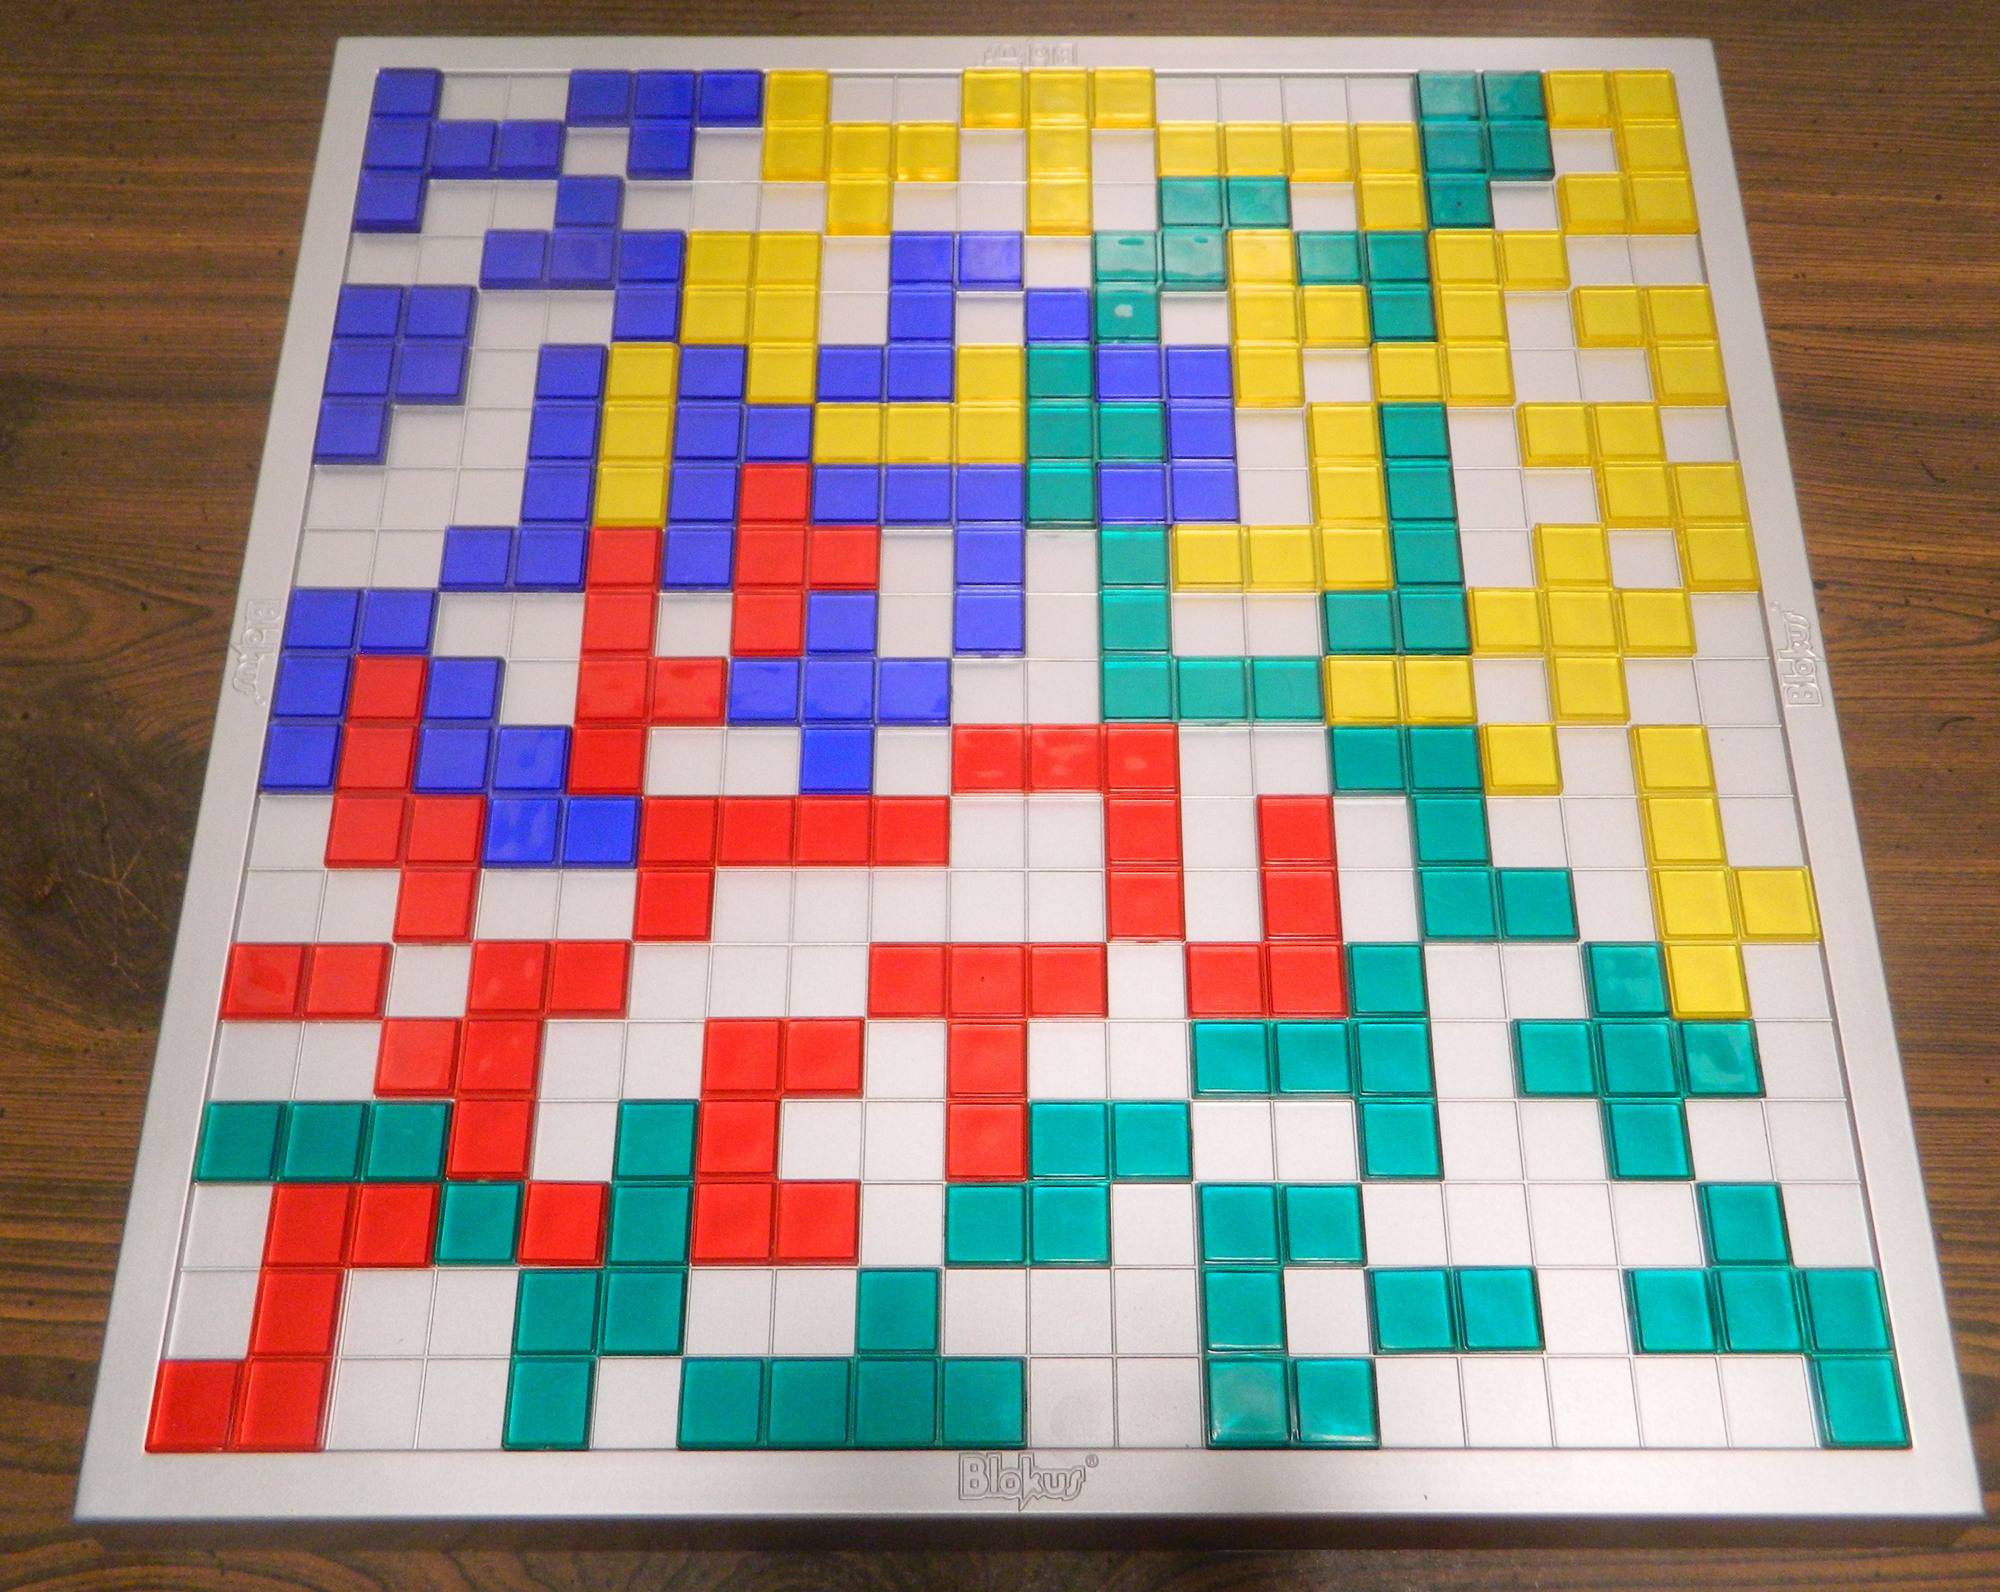 Game of the Month: Blokus